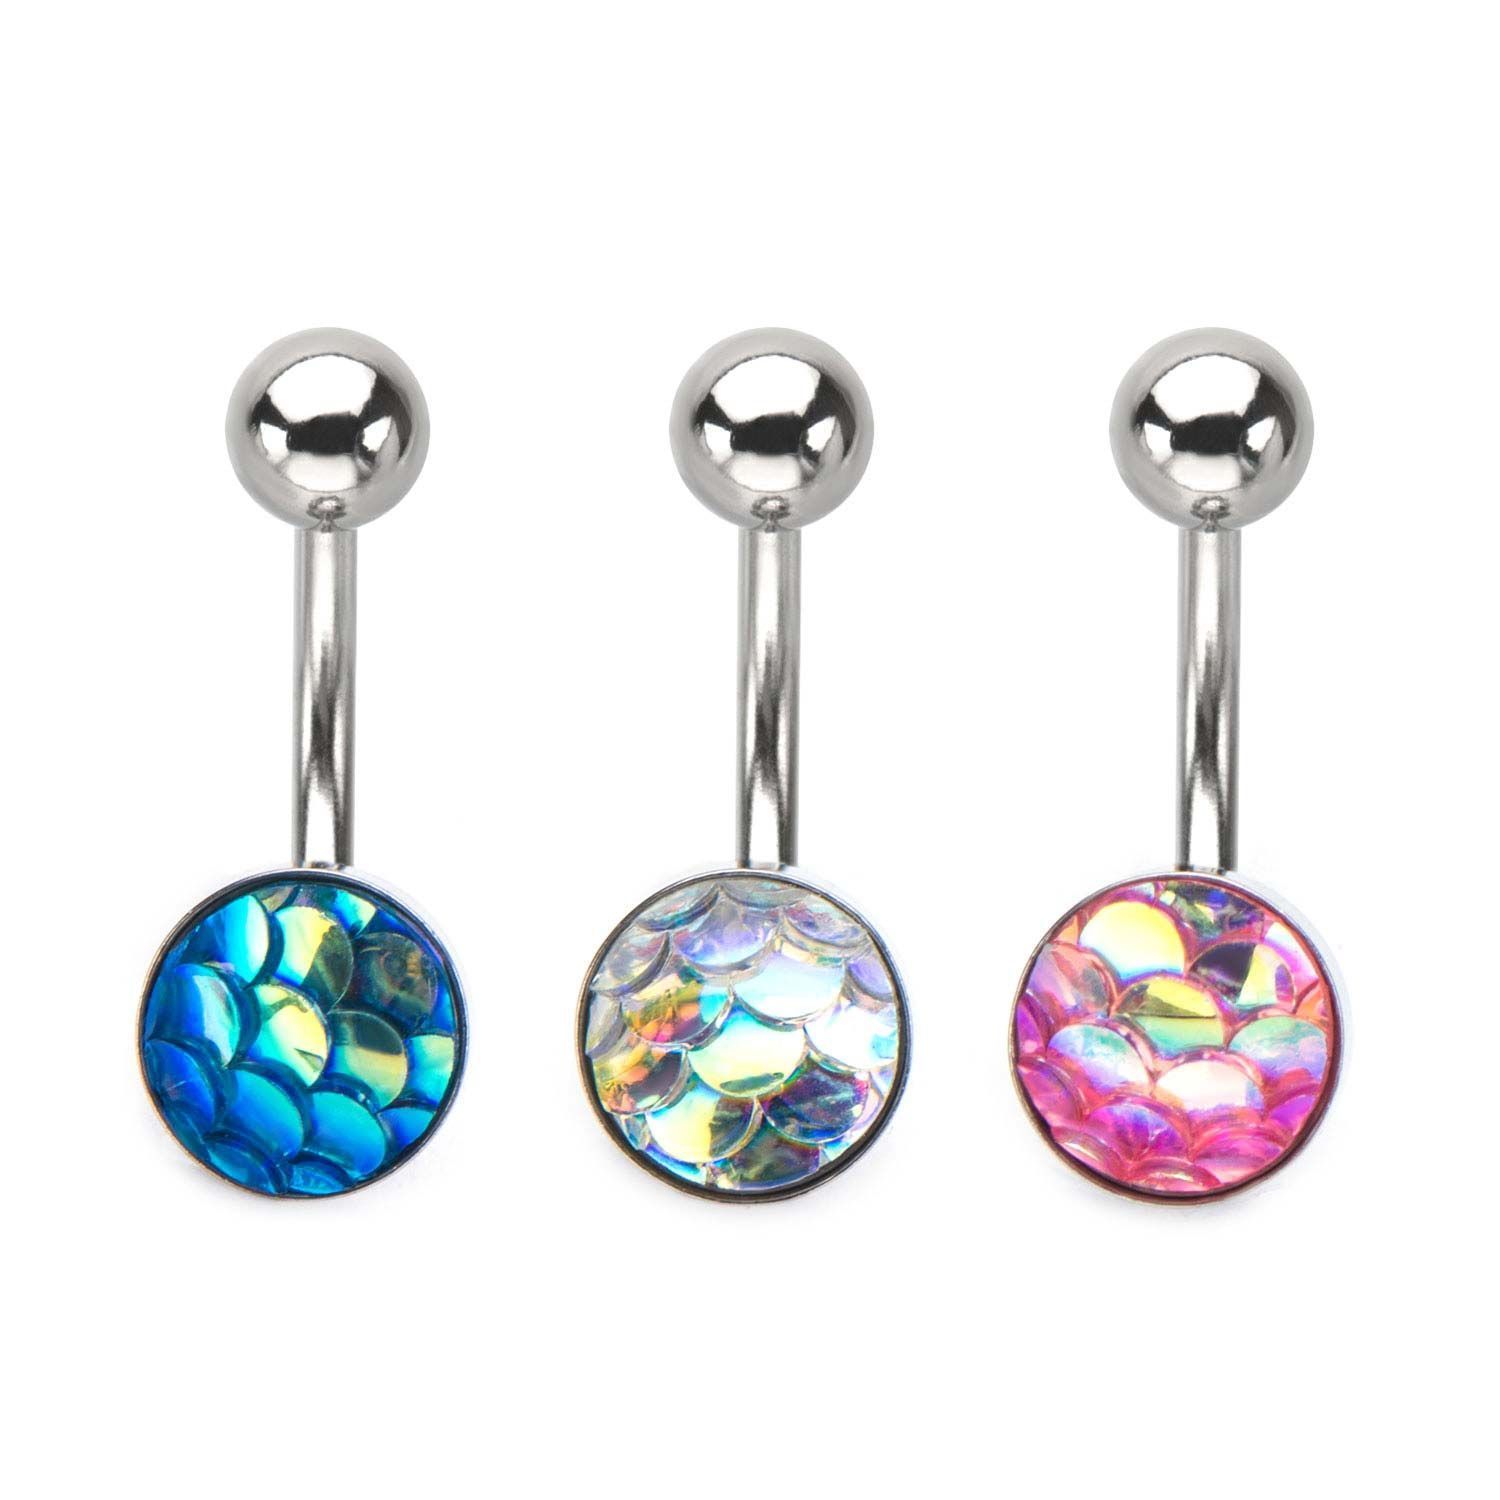 Belly Ring - No Dangle 14g 7/16 Navel with Mermaid Cast Fixed Charm sbvbn6148 -Rebel Bod-RebelBod